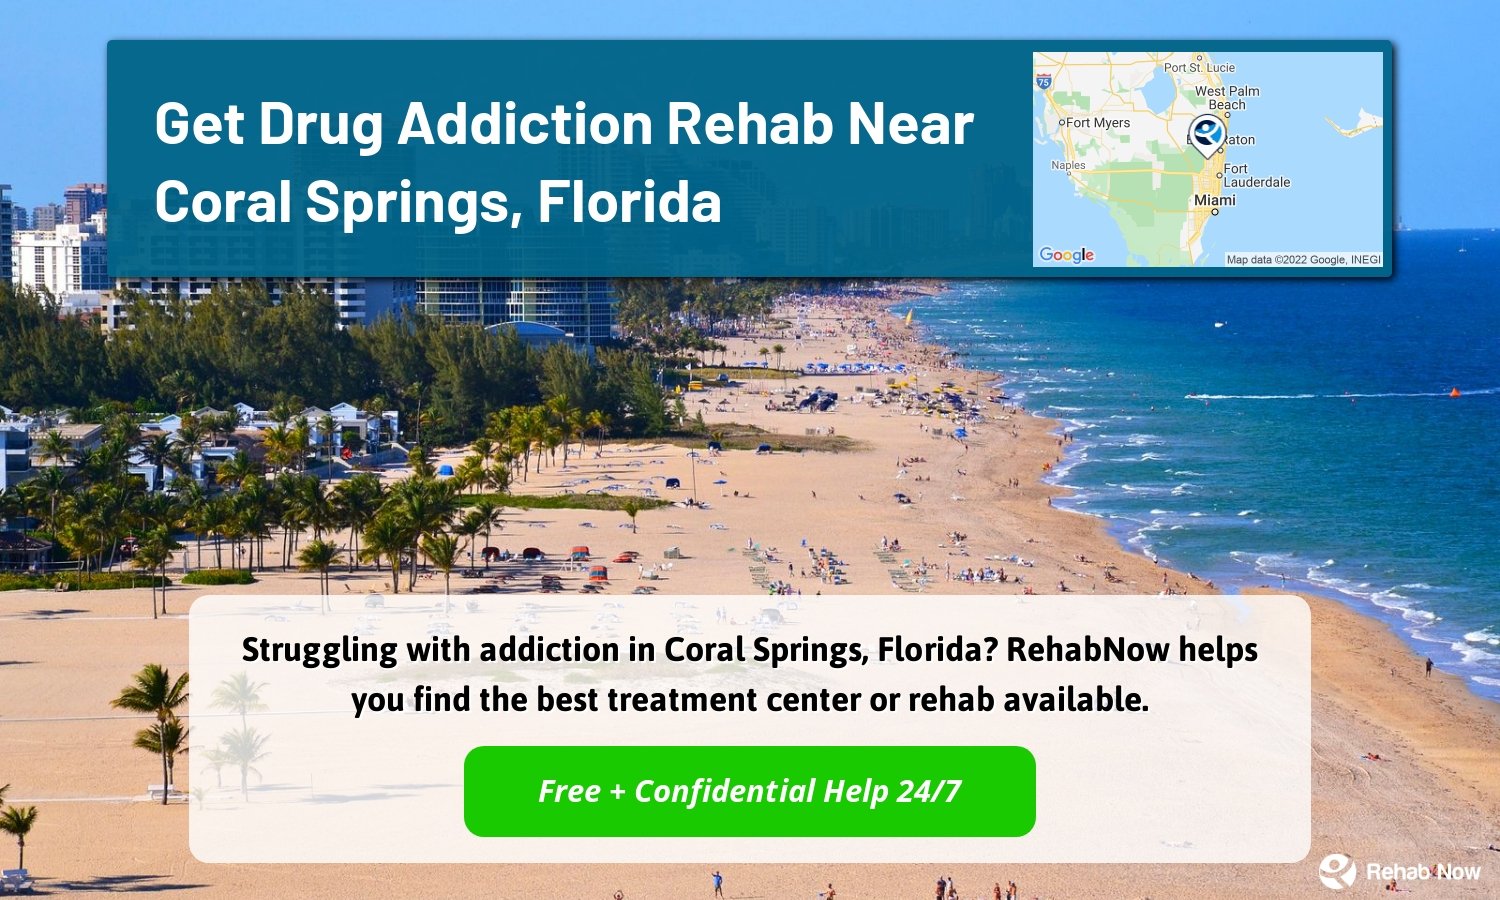 Struggling with addiction in Coral Springs, Florida? RehabNow helps you find the best treatment center or rehab available.